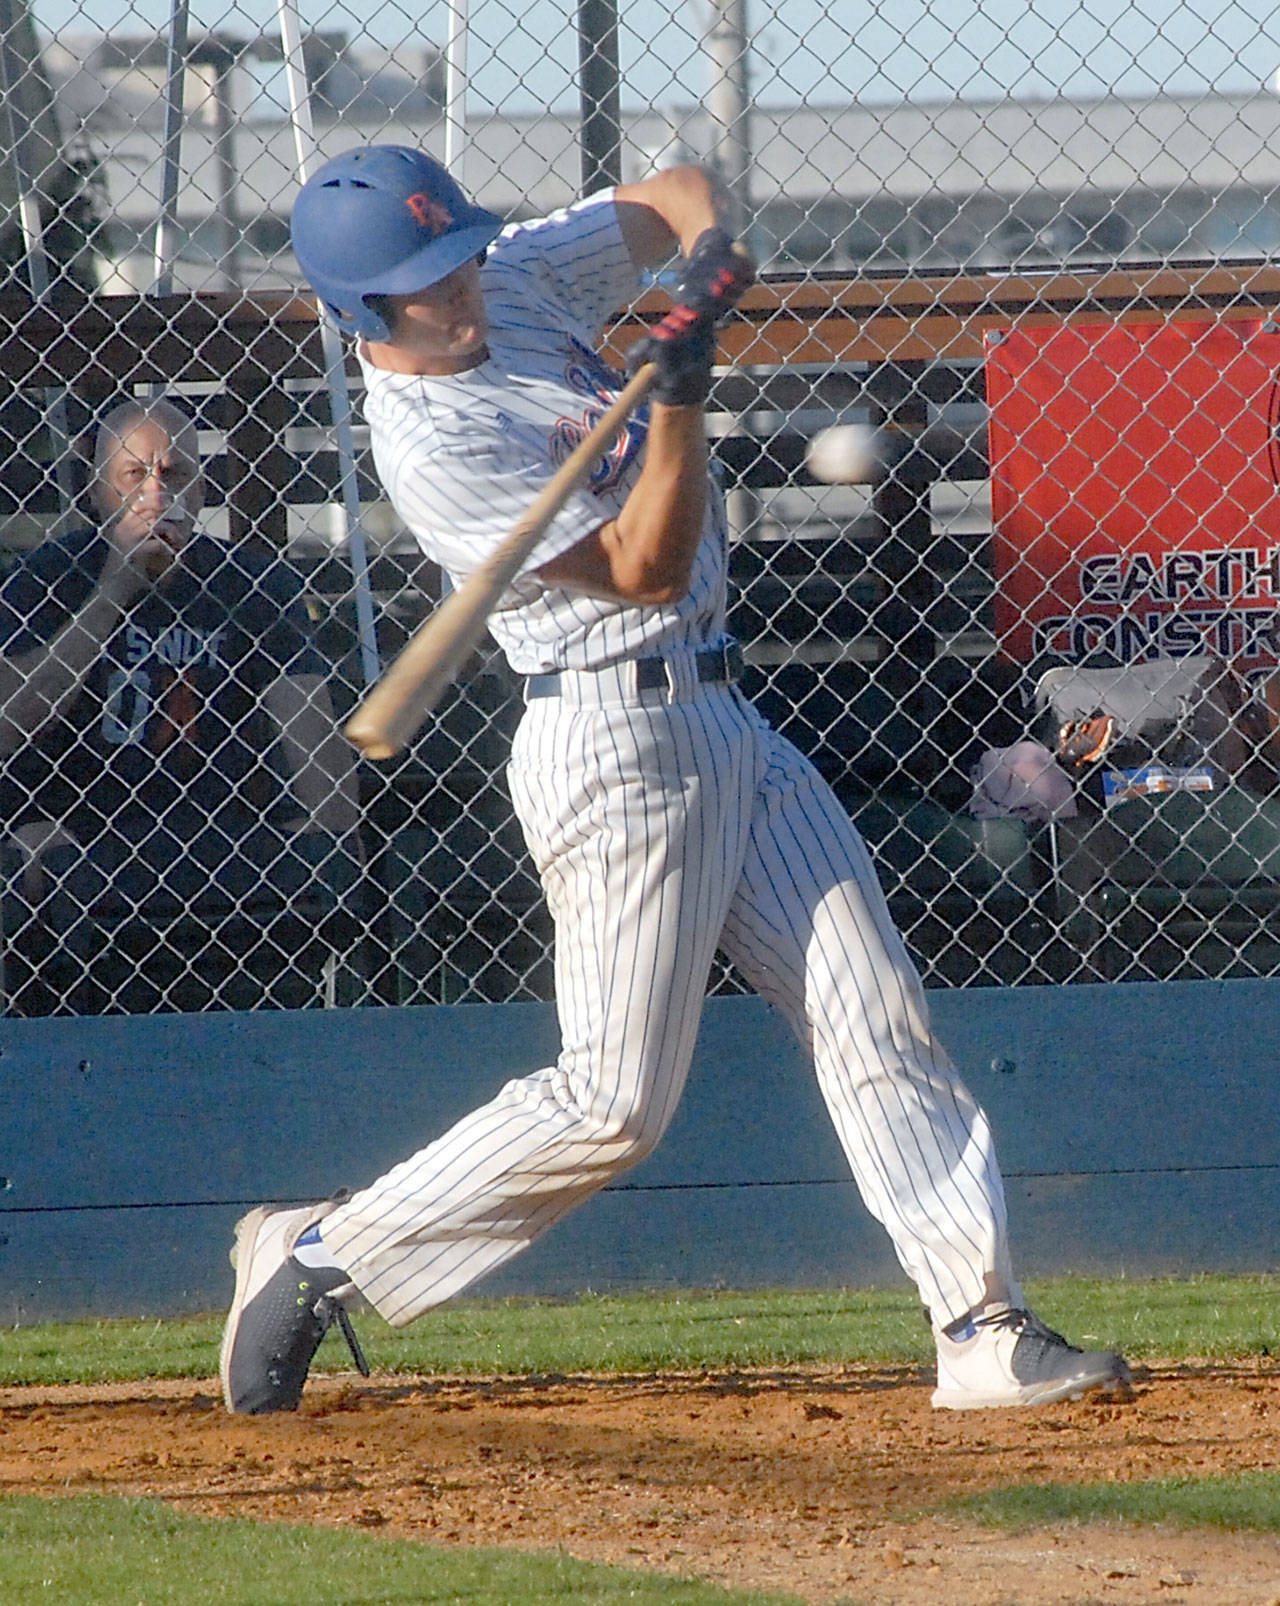 The Lefties’ Coleman Schmidt bats in the third inning on Tuesday evening for the team’s season opener against the Highland Bears at Port Angeles Civic Field. (Keith Thorpe/Peninsula Daily News)